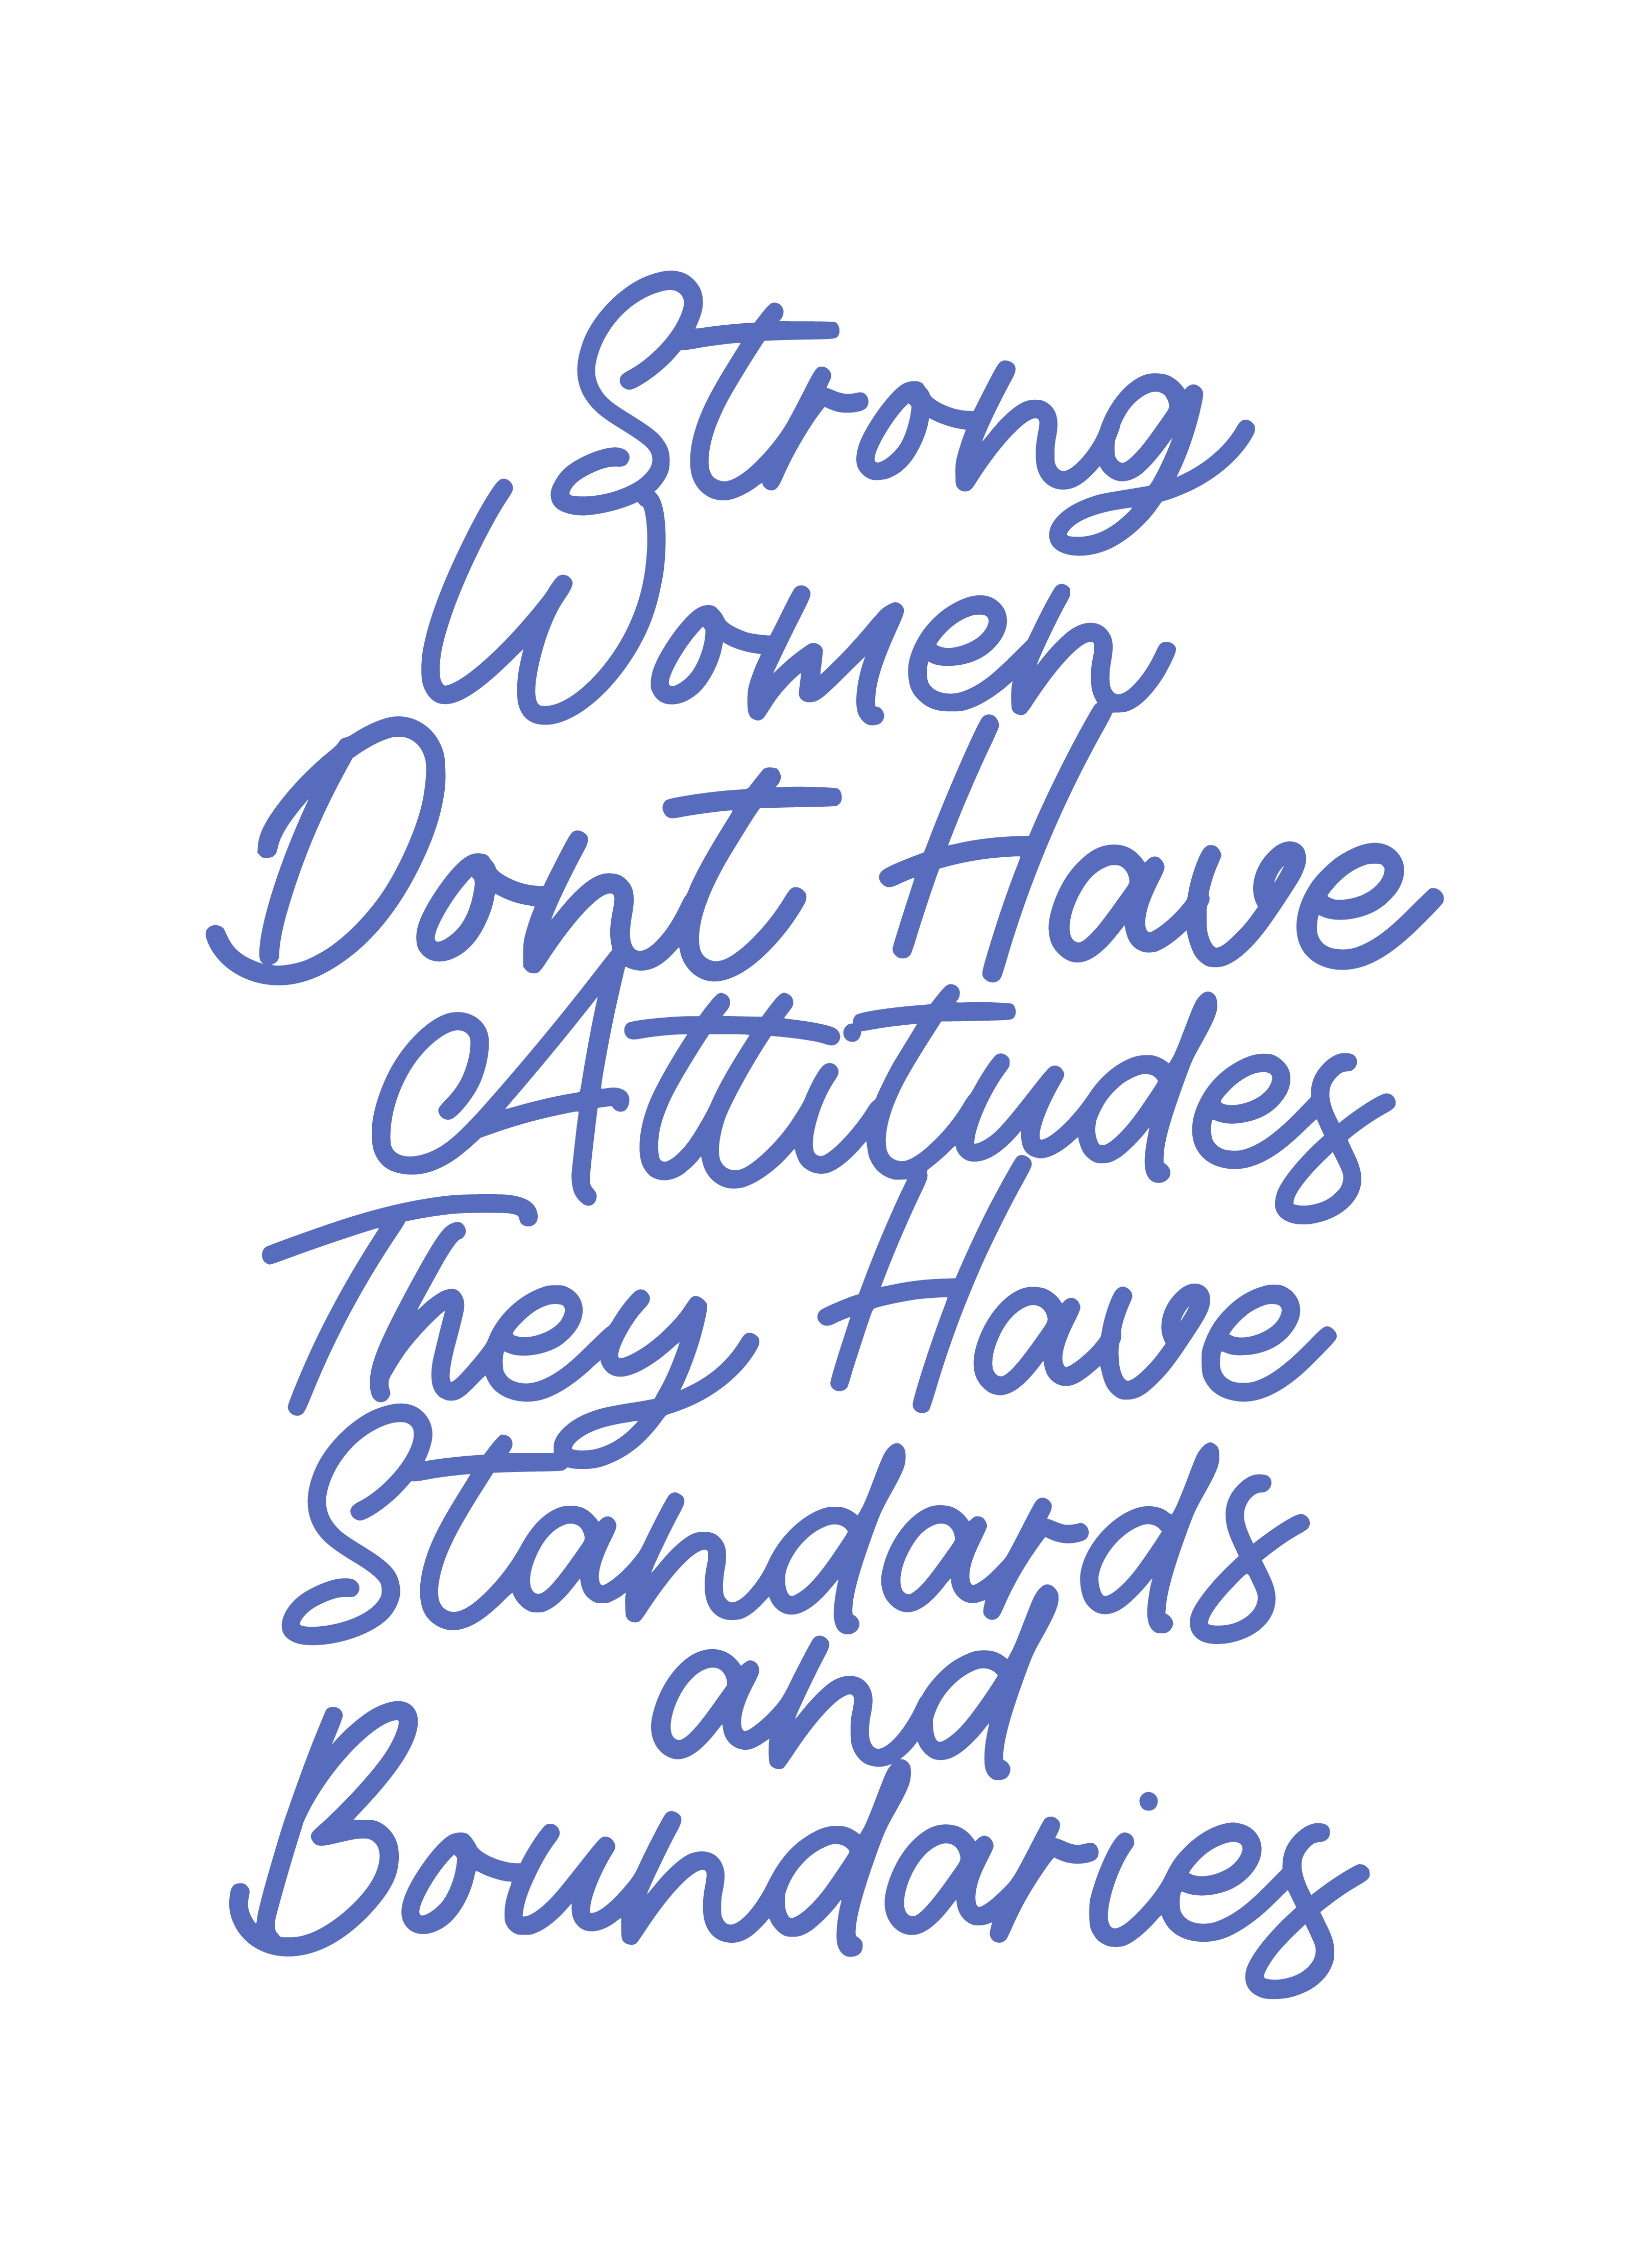 Strong Women Dont have attitudes they have standards and boundaries SVG Boss Lady  Black Lives Matter  Lady Woman Diva Tshirt Cut File Cricut Silhouette Women Empowerment svg Feminism svg Girl Power